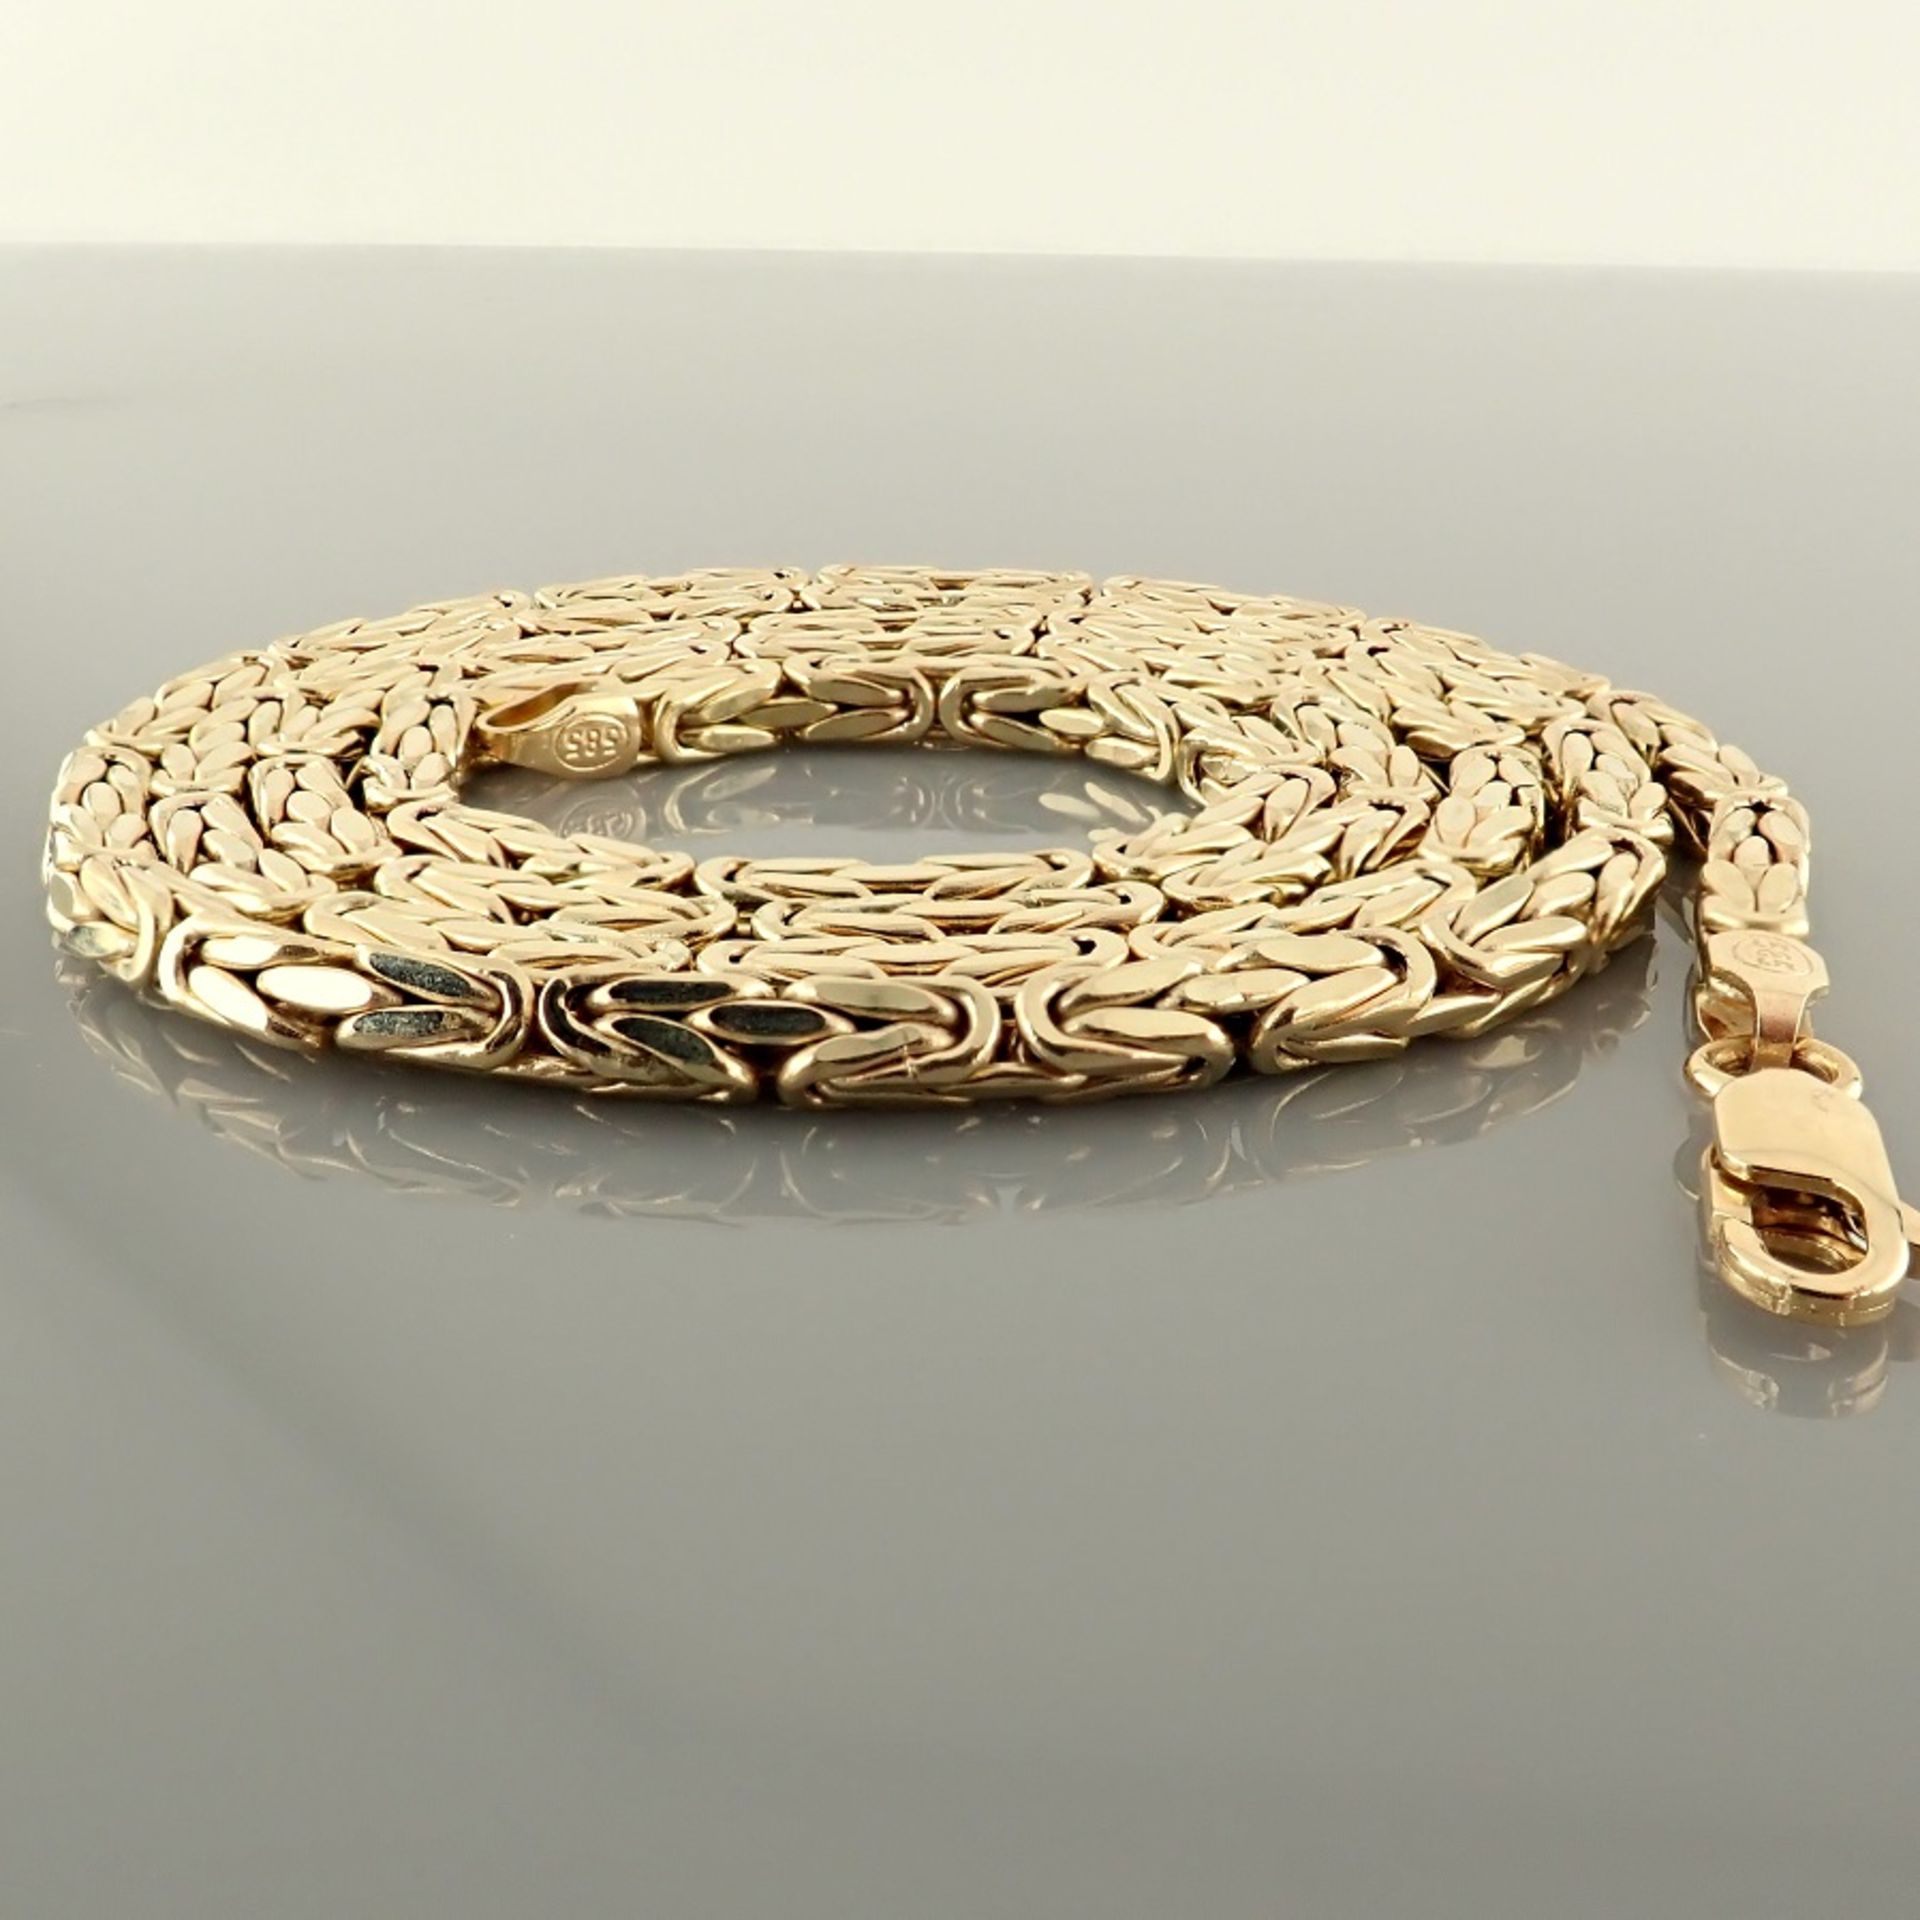 62 cm (24.4 in) Byzantine Chain Necklace. In 14K Yellow Gold - Image 2 of 3